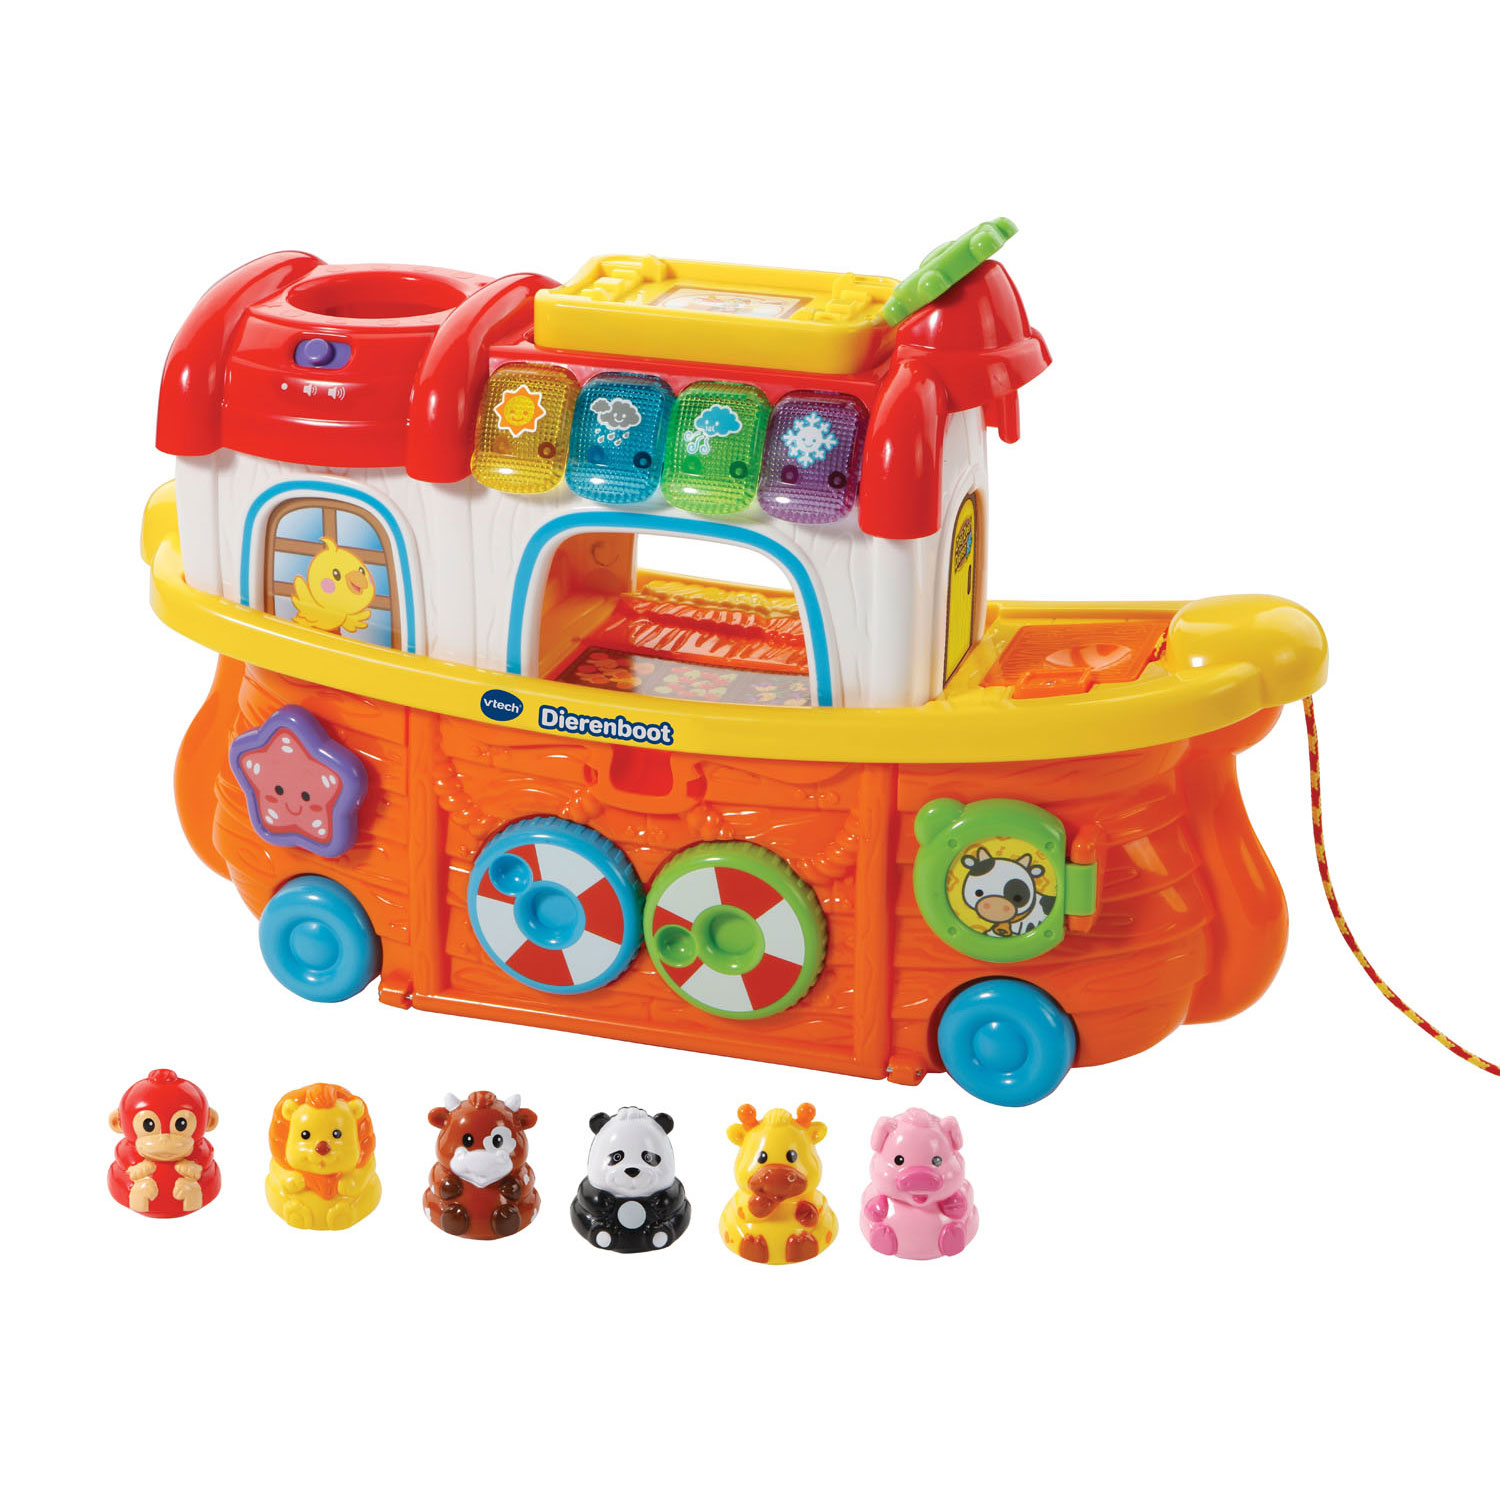 kip Maxim Dosering VTech Zoef Zoef Dieren - Pet boat | Thimble Toys